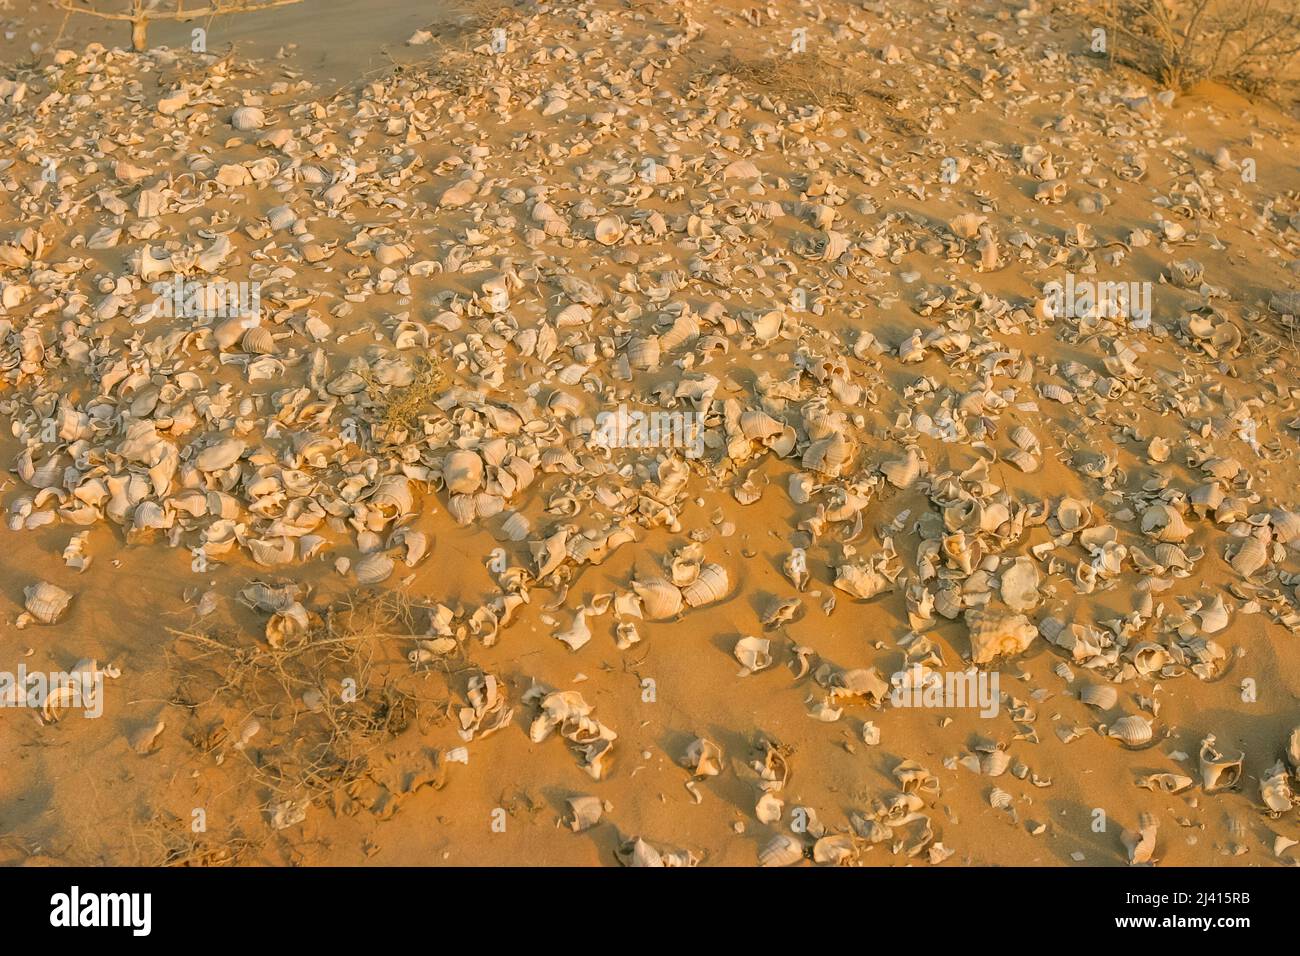 A midden or shell heap, consisting of mollusc shells associated with past human occupation, situated in the desert in Ras al Khaimah, UAE. Stock Photo